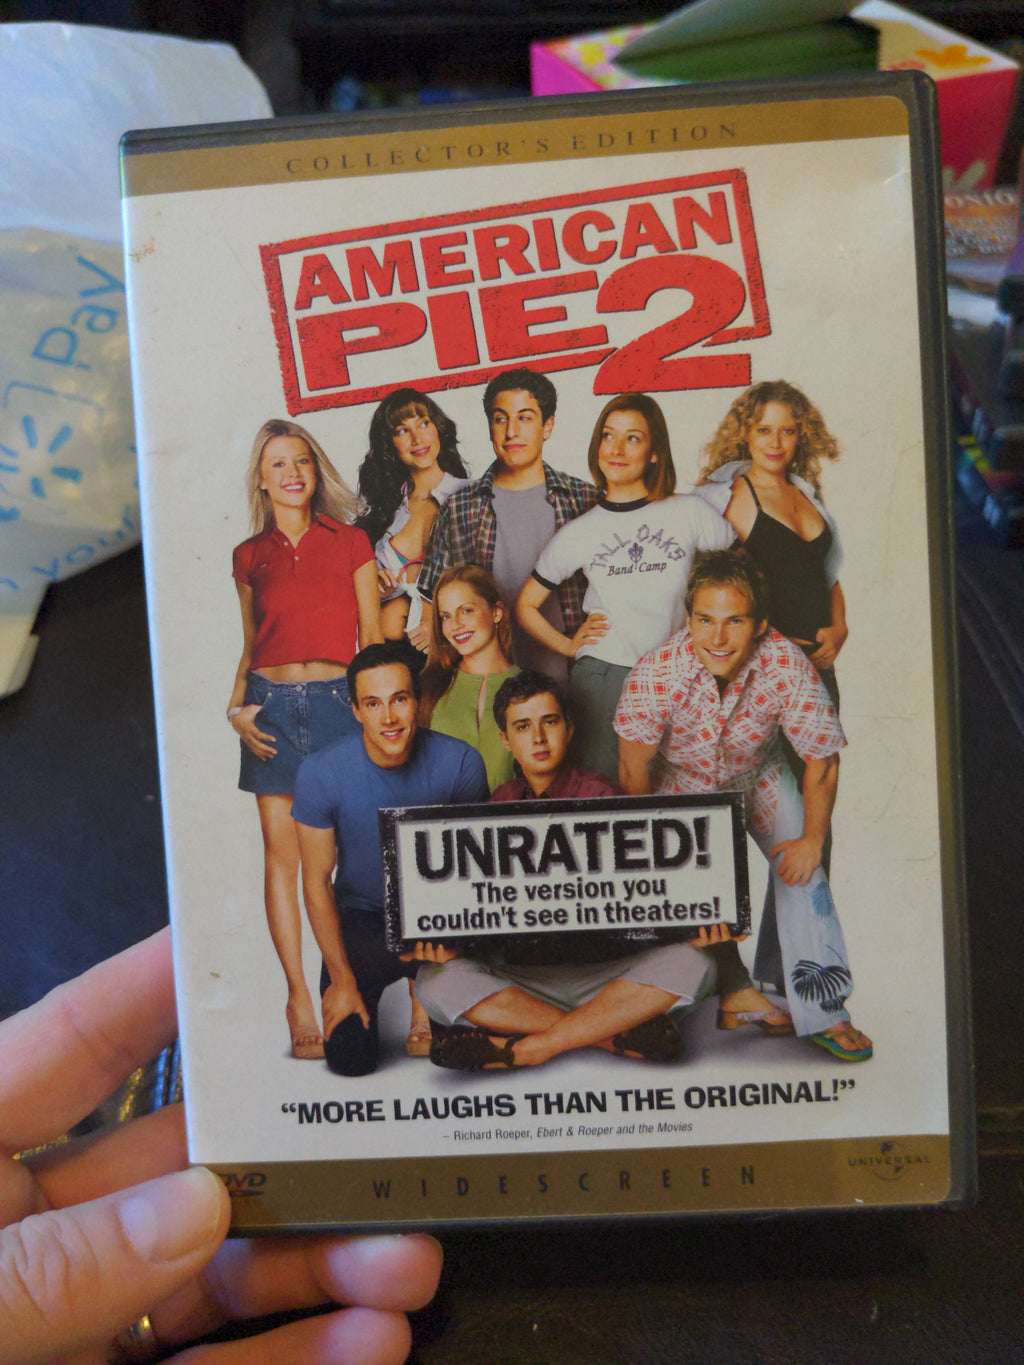 American Pie 2 Widescreen Collector's Edition Unrated DVD w/Insert Booklet